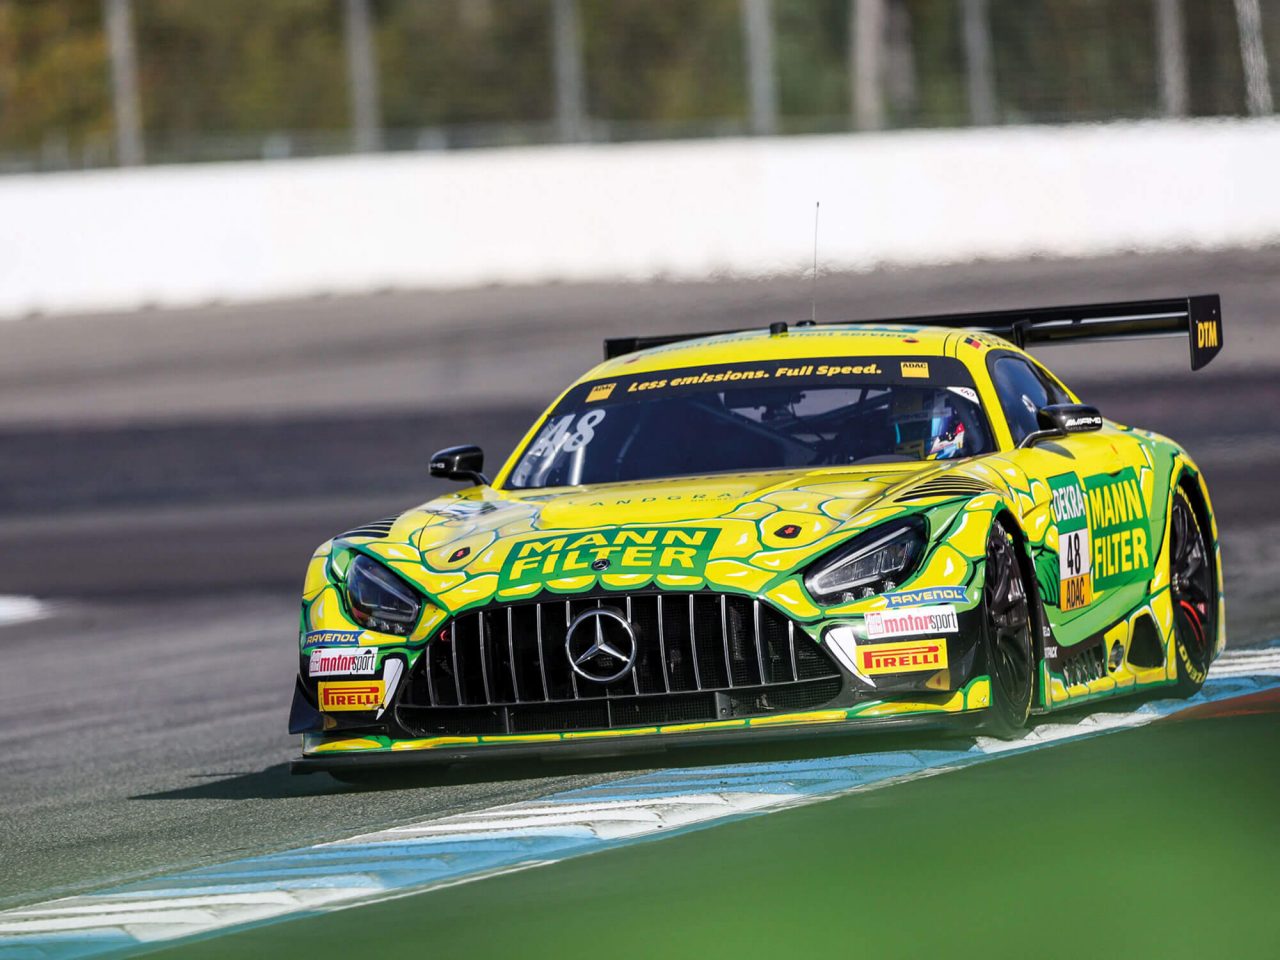 MANN-FILTER Mamba concludes the 2023 DTM season in the top 5 at Hockenheimring